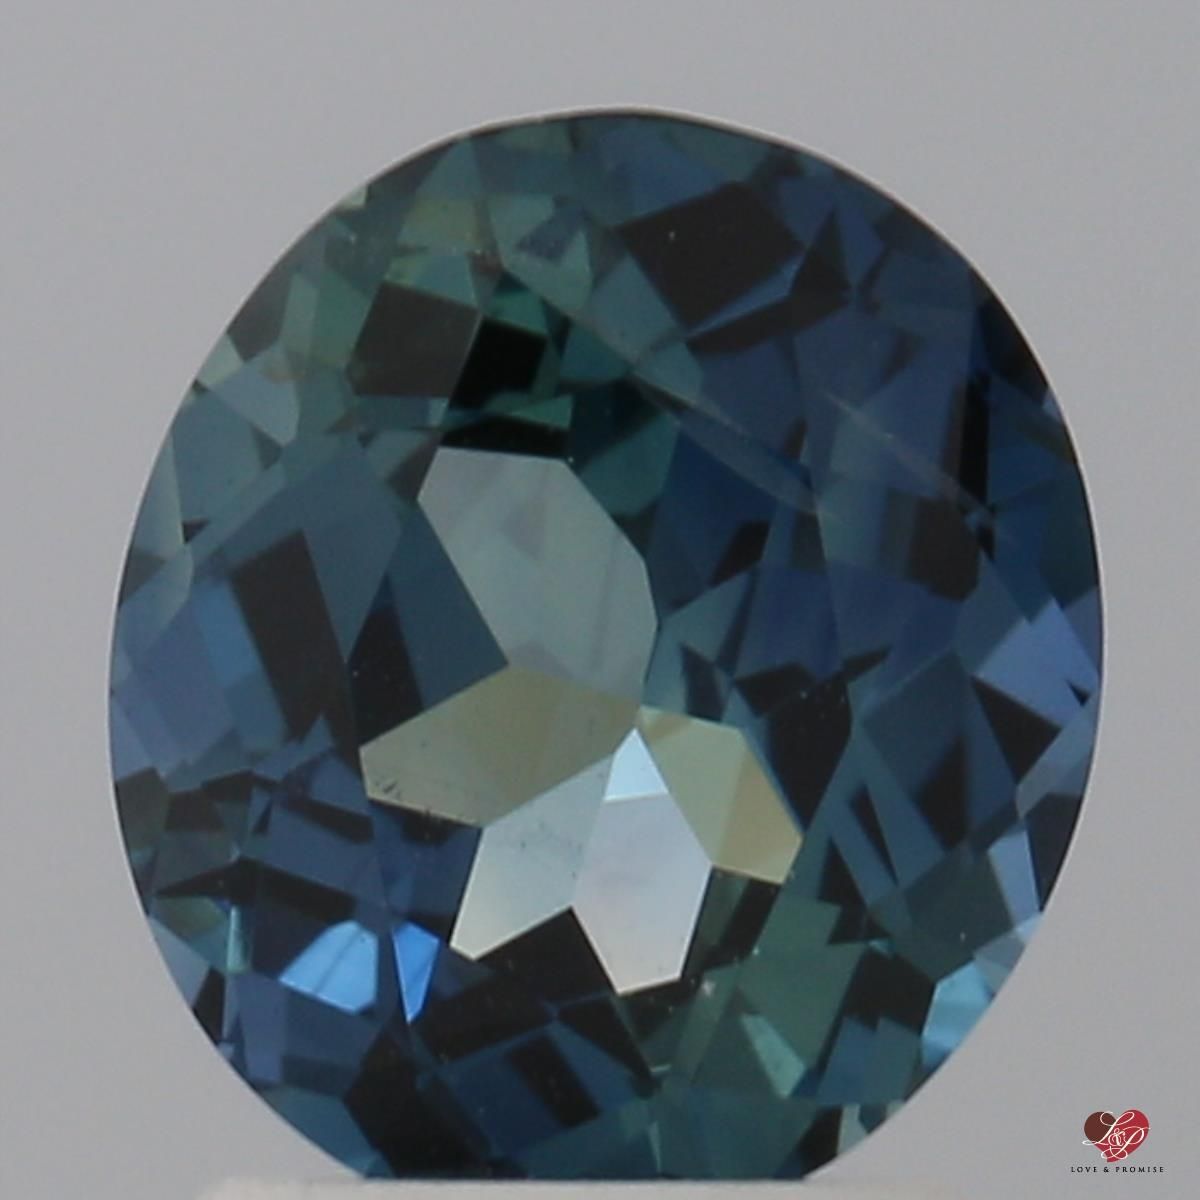 2.04cts Oval Bi-Color Midnight Blue & Teal Sapphire